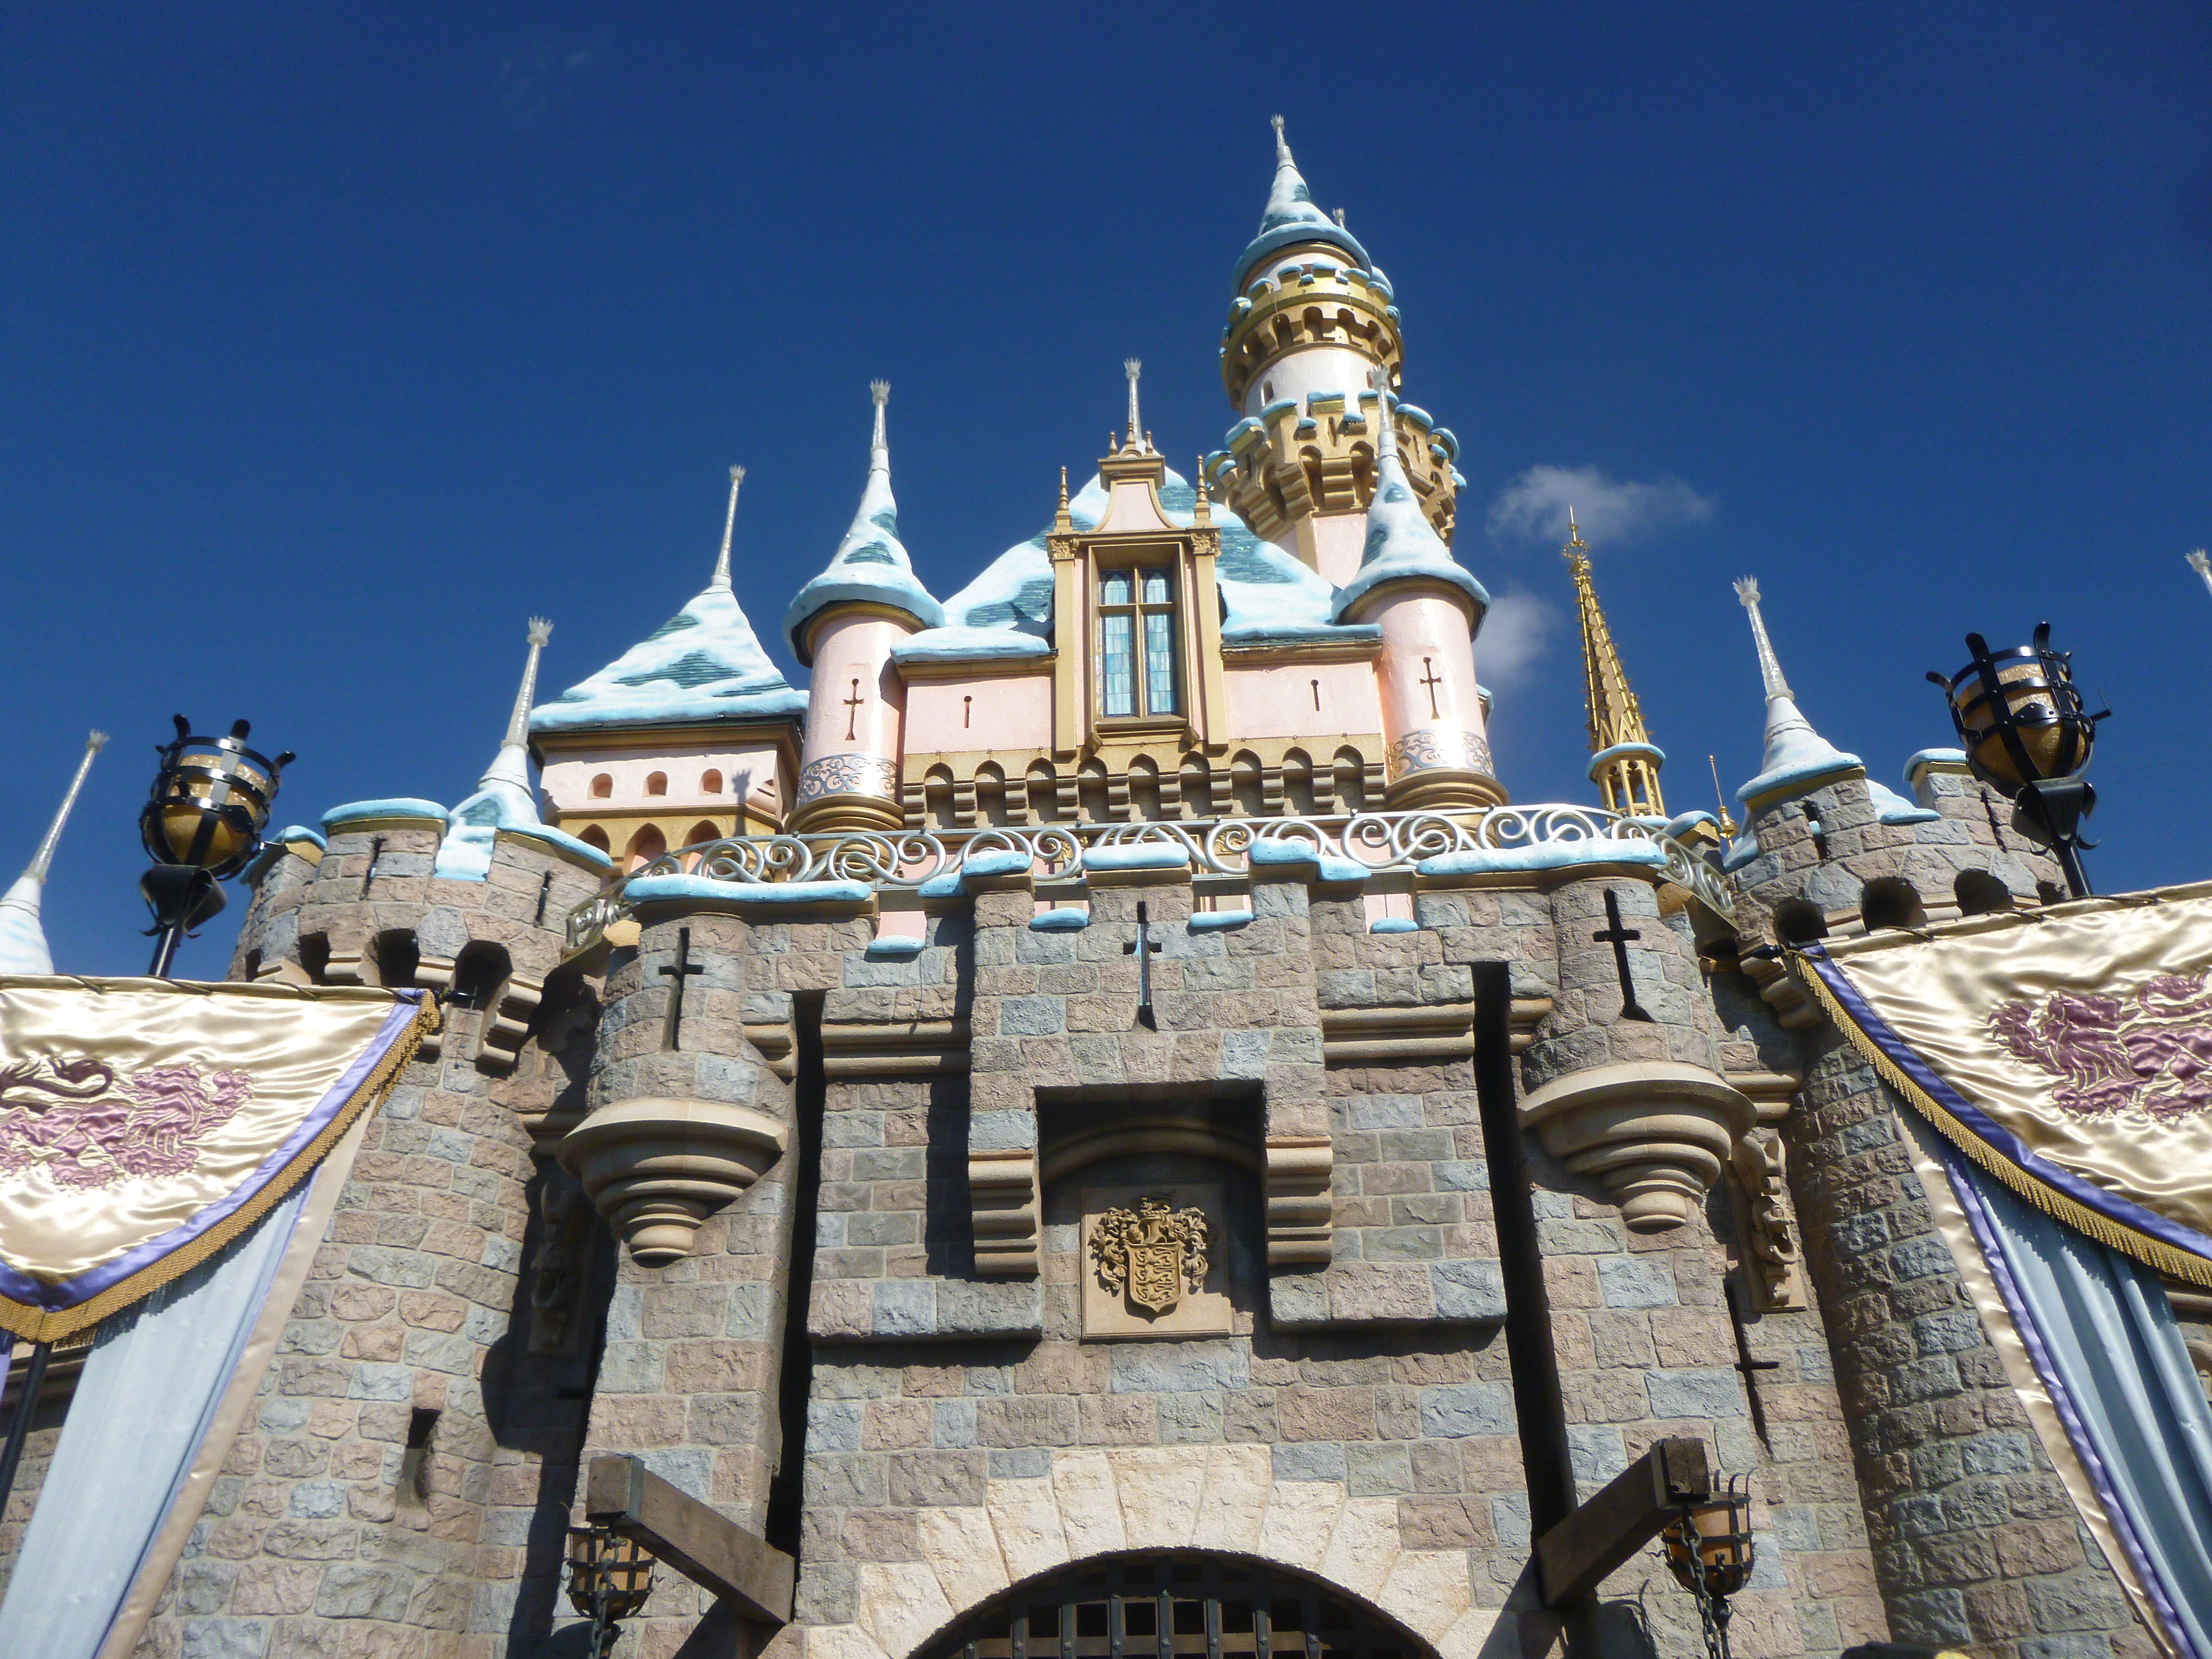 For the First Time in Forever: Our Family Discovers the Magic of Disneyland